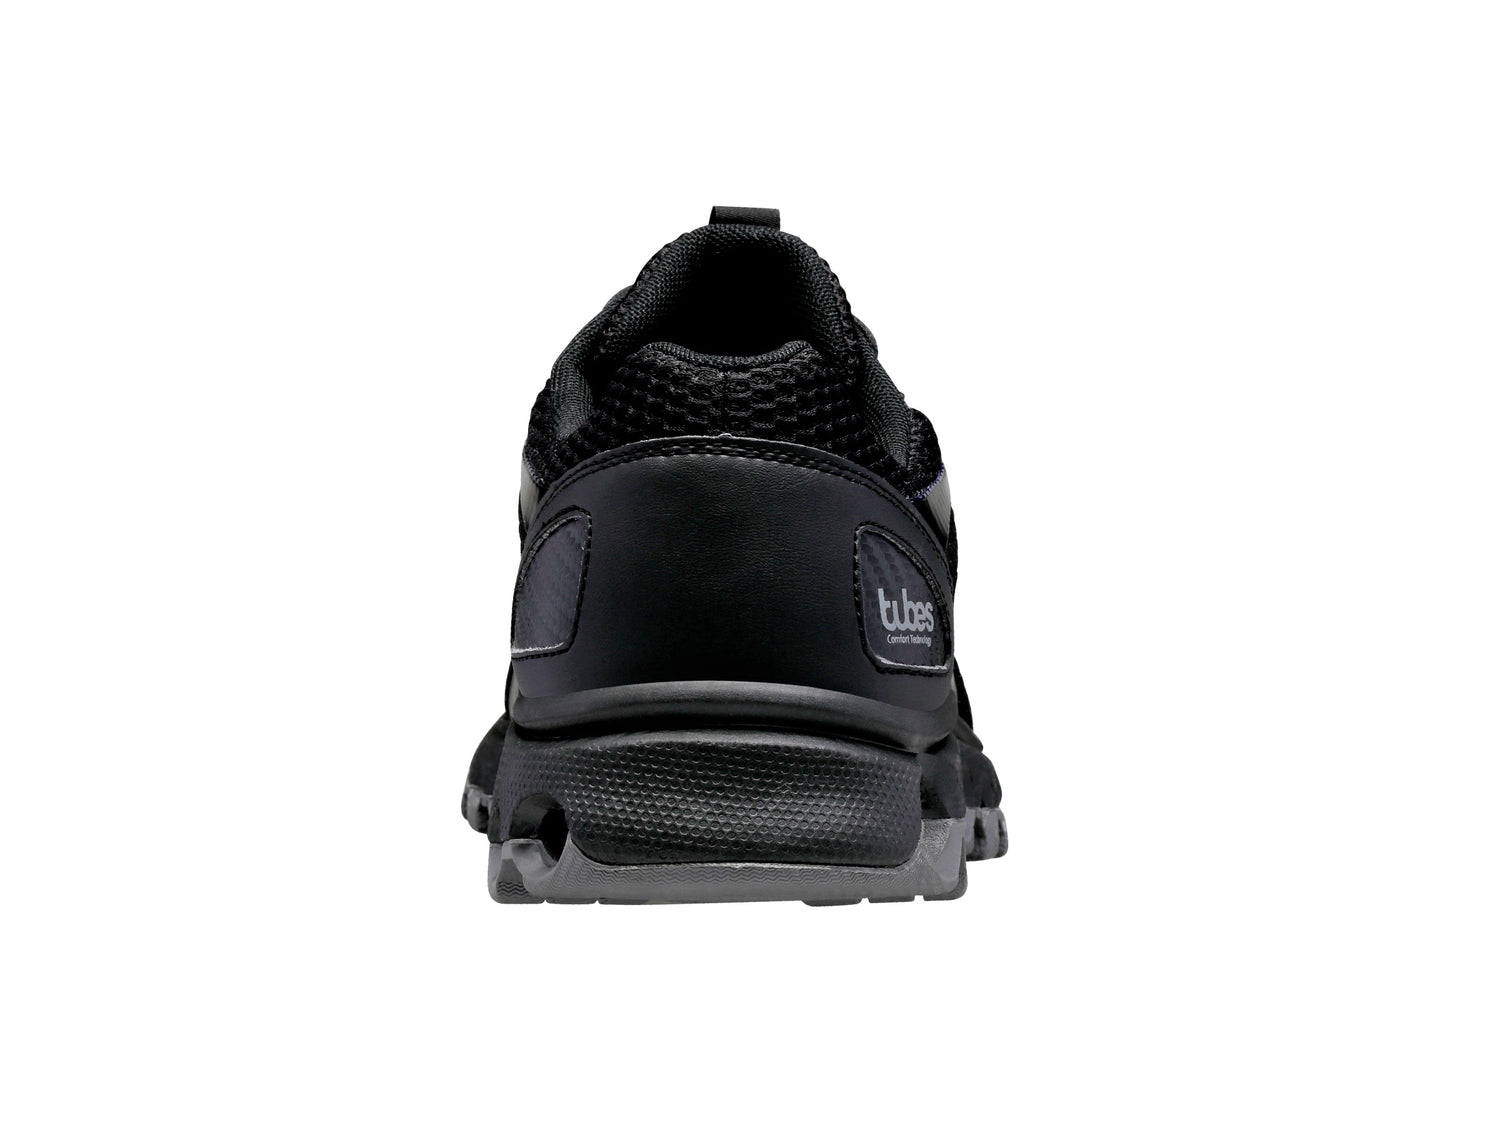 K-Swiss Men's Tubes 200 Active Shoes in Black/Charcoal